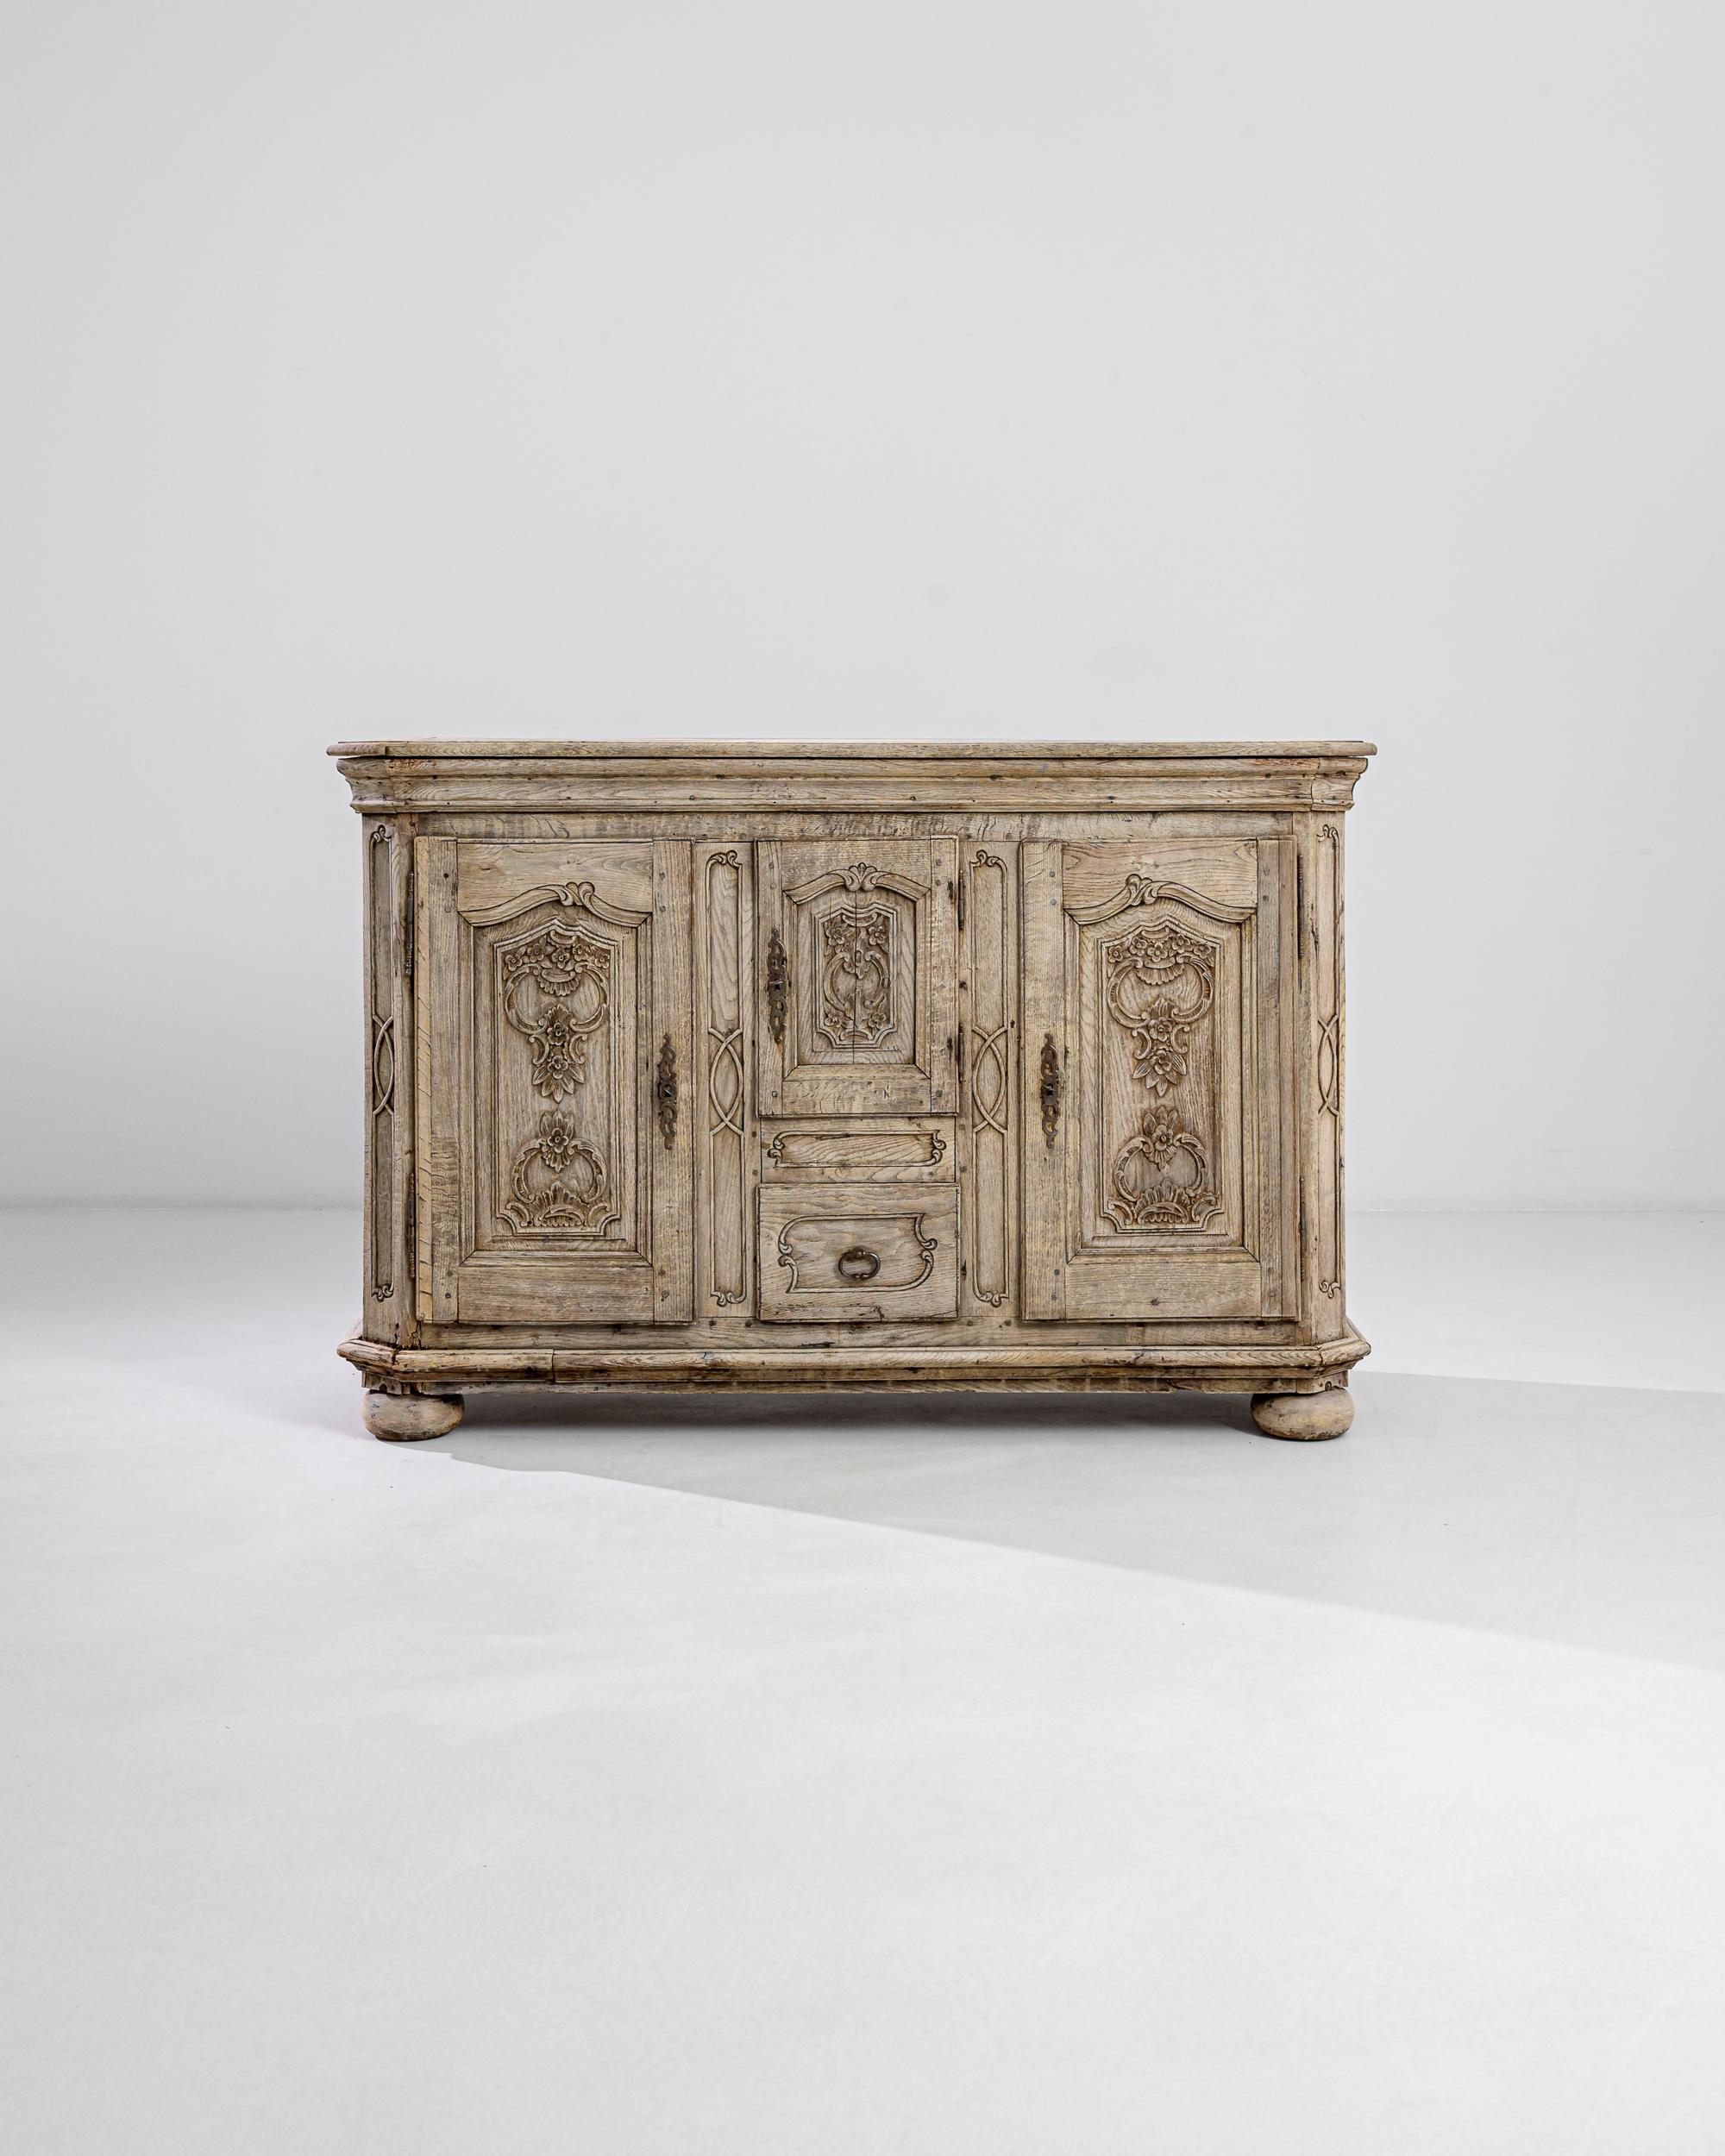 This 19th century French oak buffet boasts elaborate panels with plentiful Baroque flower carvings mirrored on the three raised doors. The piece reveals a strong neoclassical influence, the elegant lines carved in between panels vibrate with a